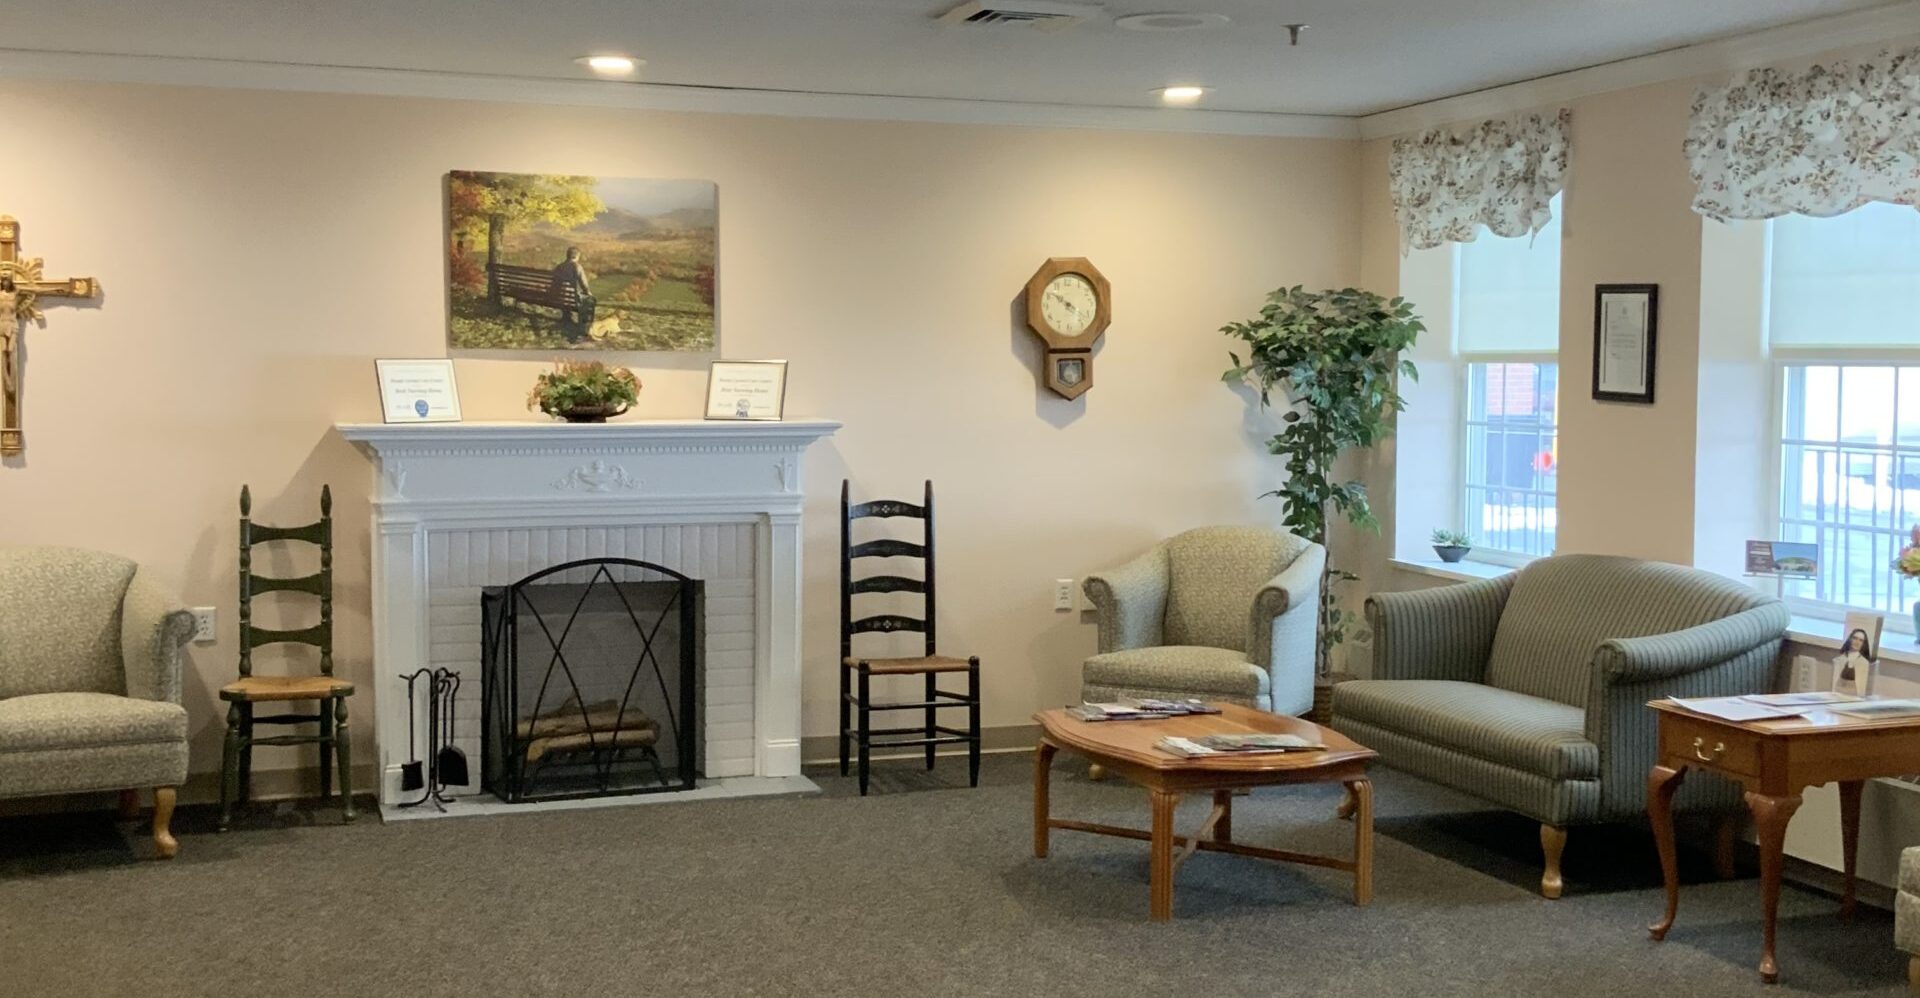 It is here at Mount Carmel Care Center where our belief is that each home should provide a welcoming, person-centered environment and atmosphere of a “Home”.